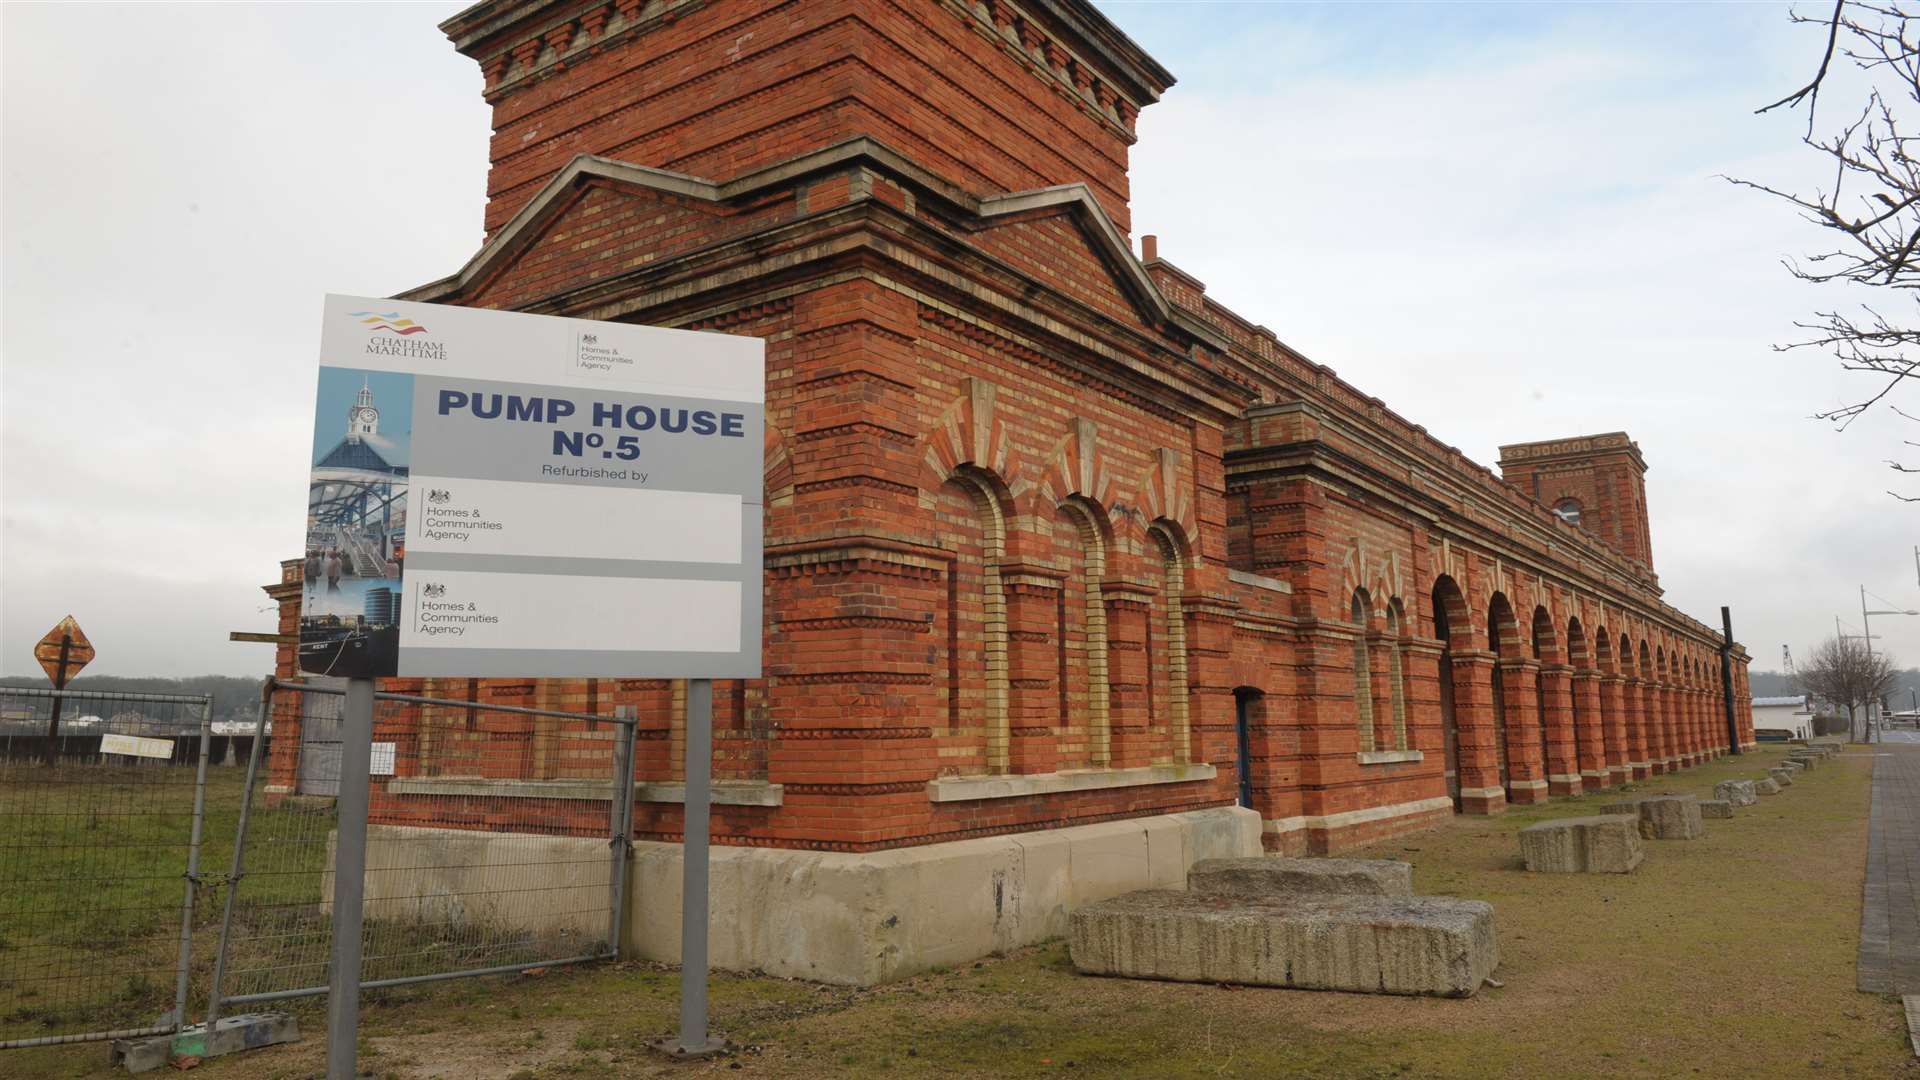 Pump House No.5 is set to become a craft distillery.